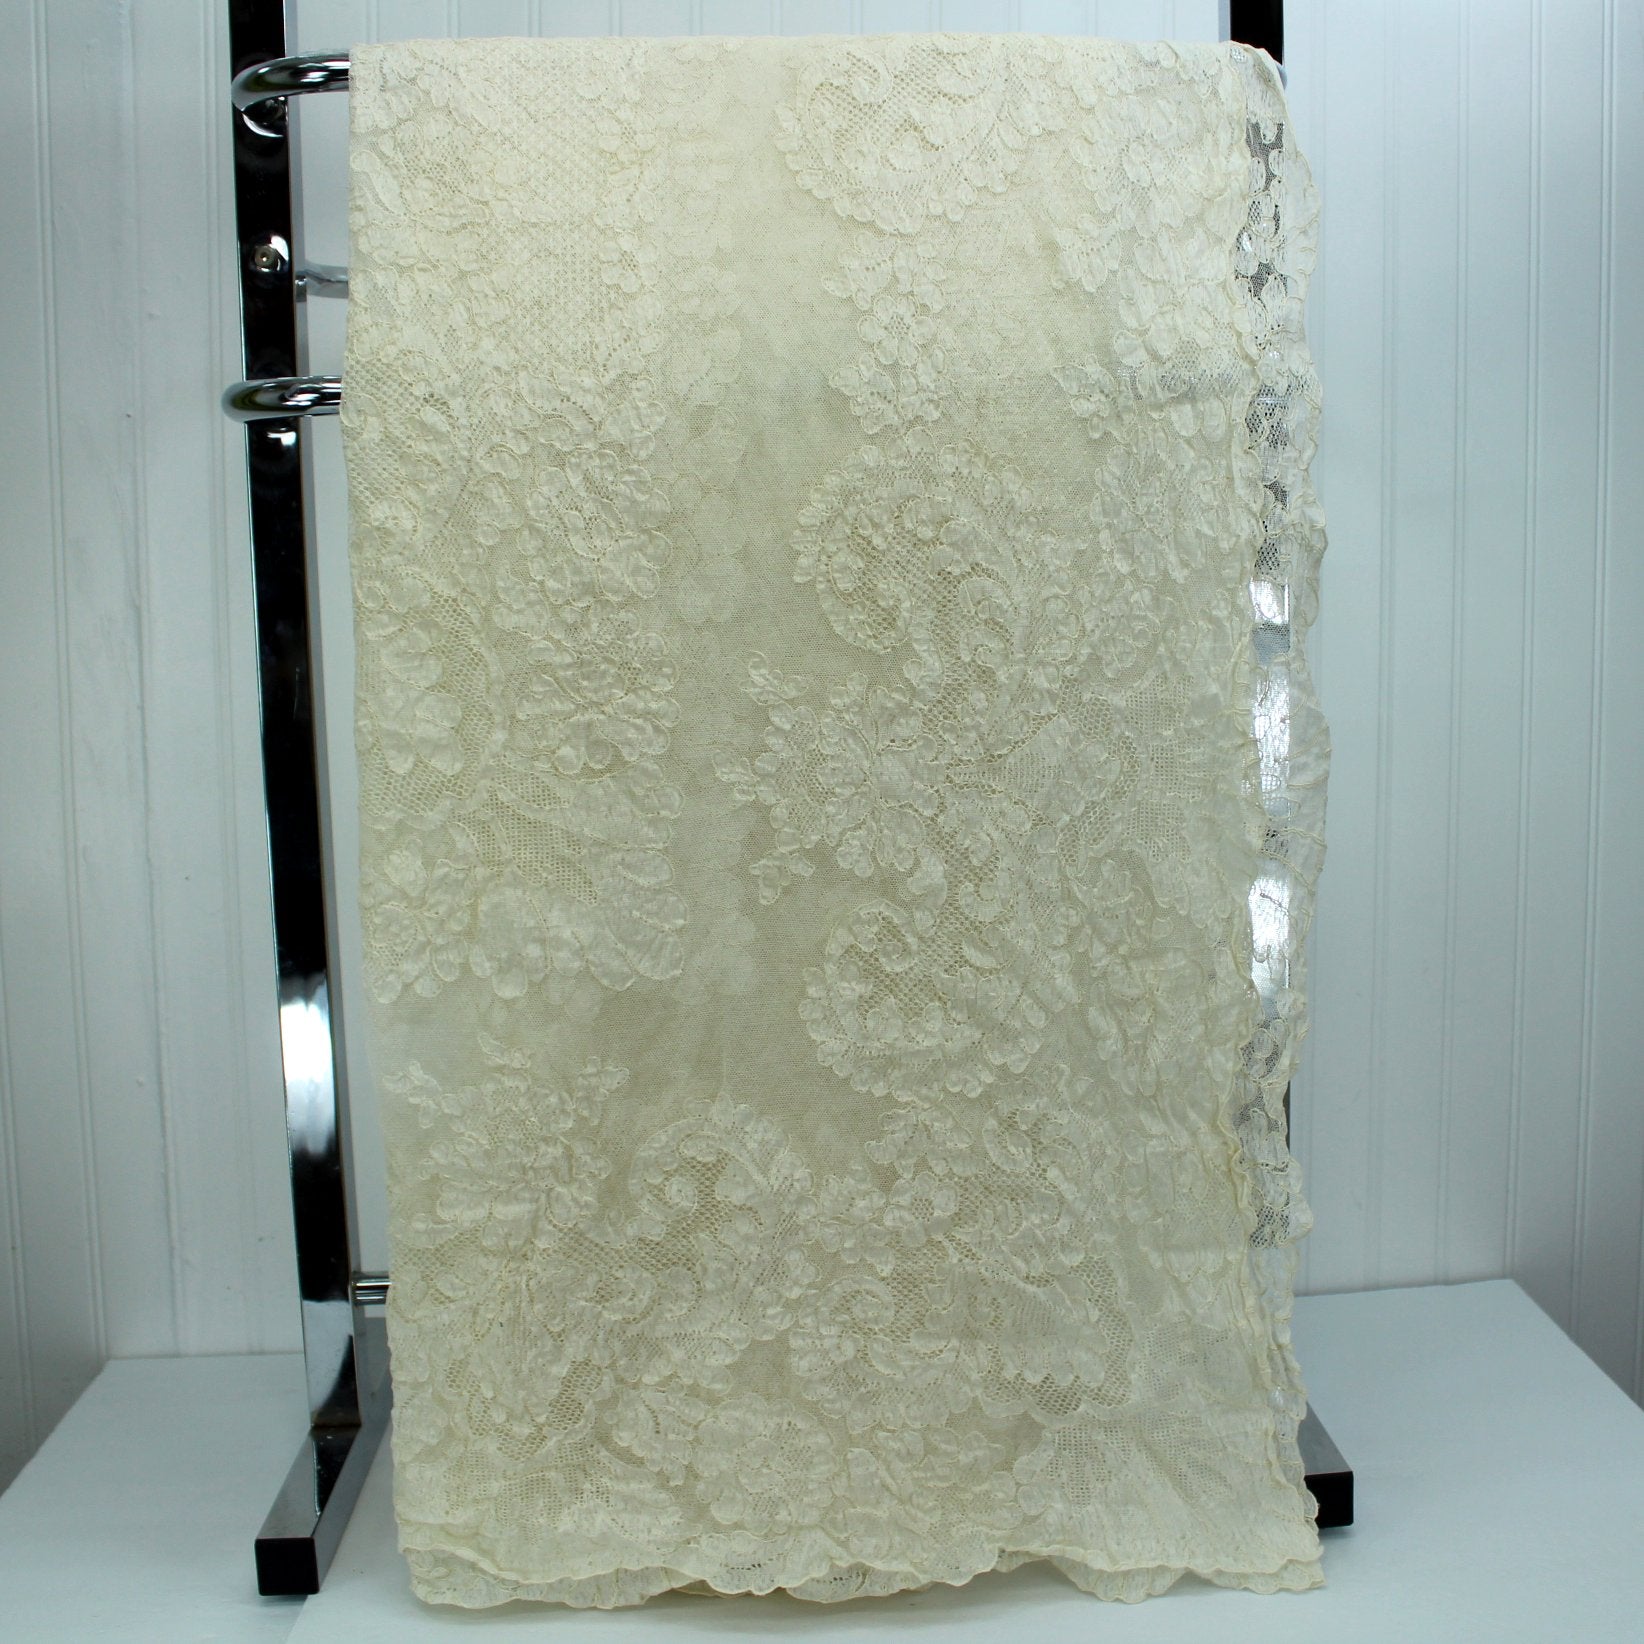 Alencon Cream Lace Tablecloth France Made for Marshall Field Exquisite length folded view